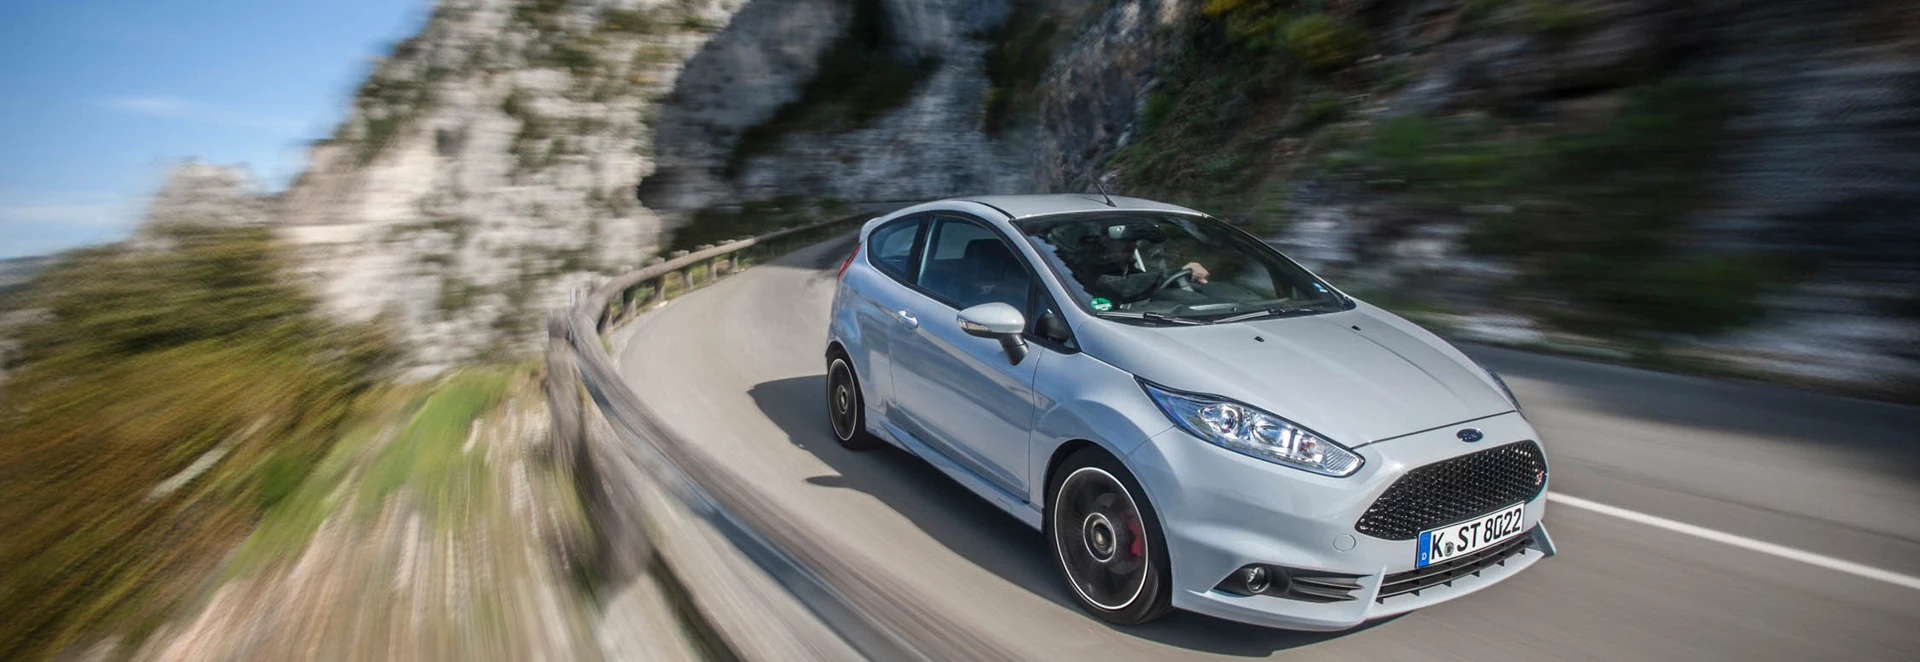 Five things you probably didn’t know about the Ford Fiesta 